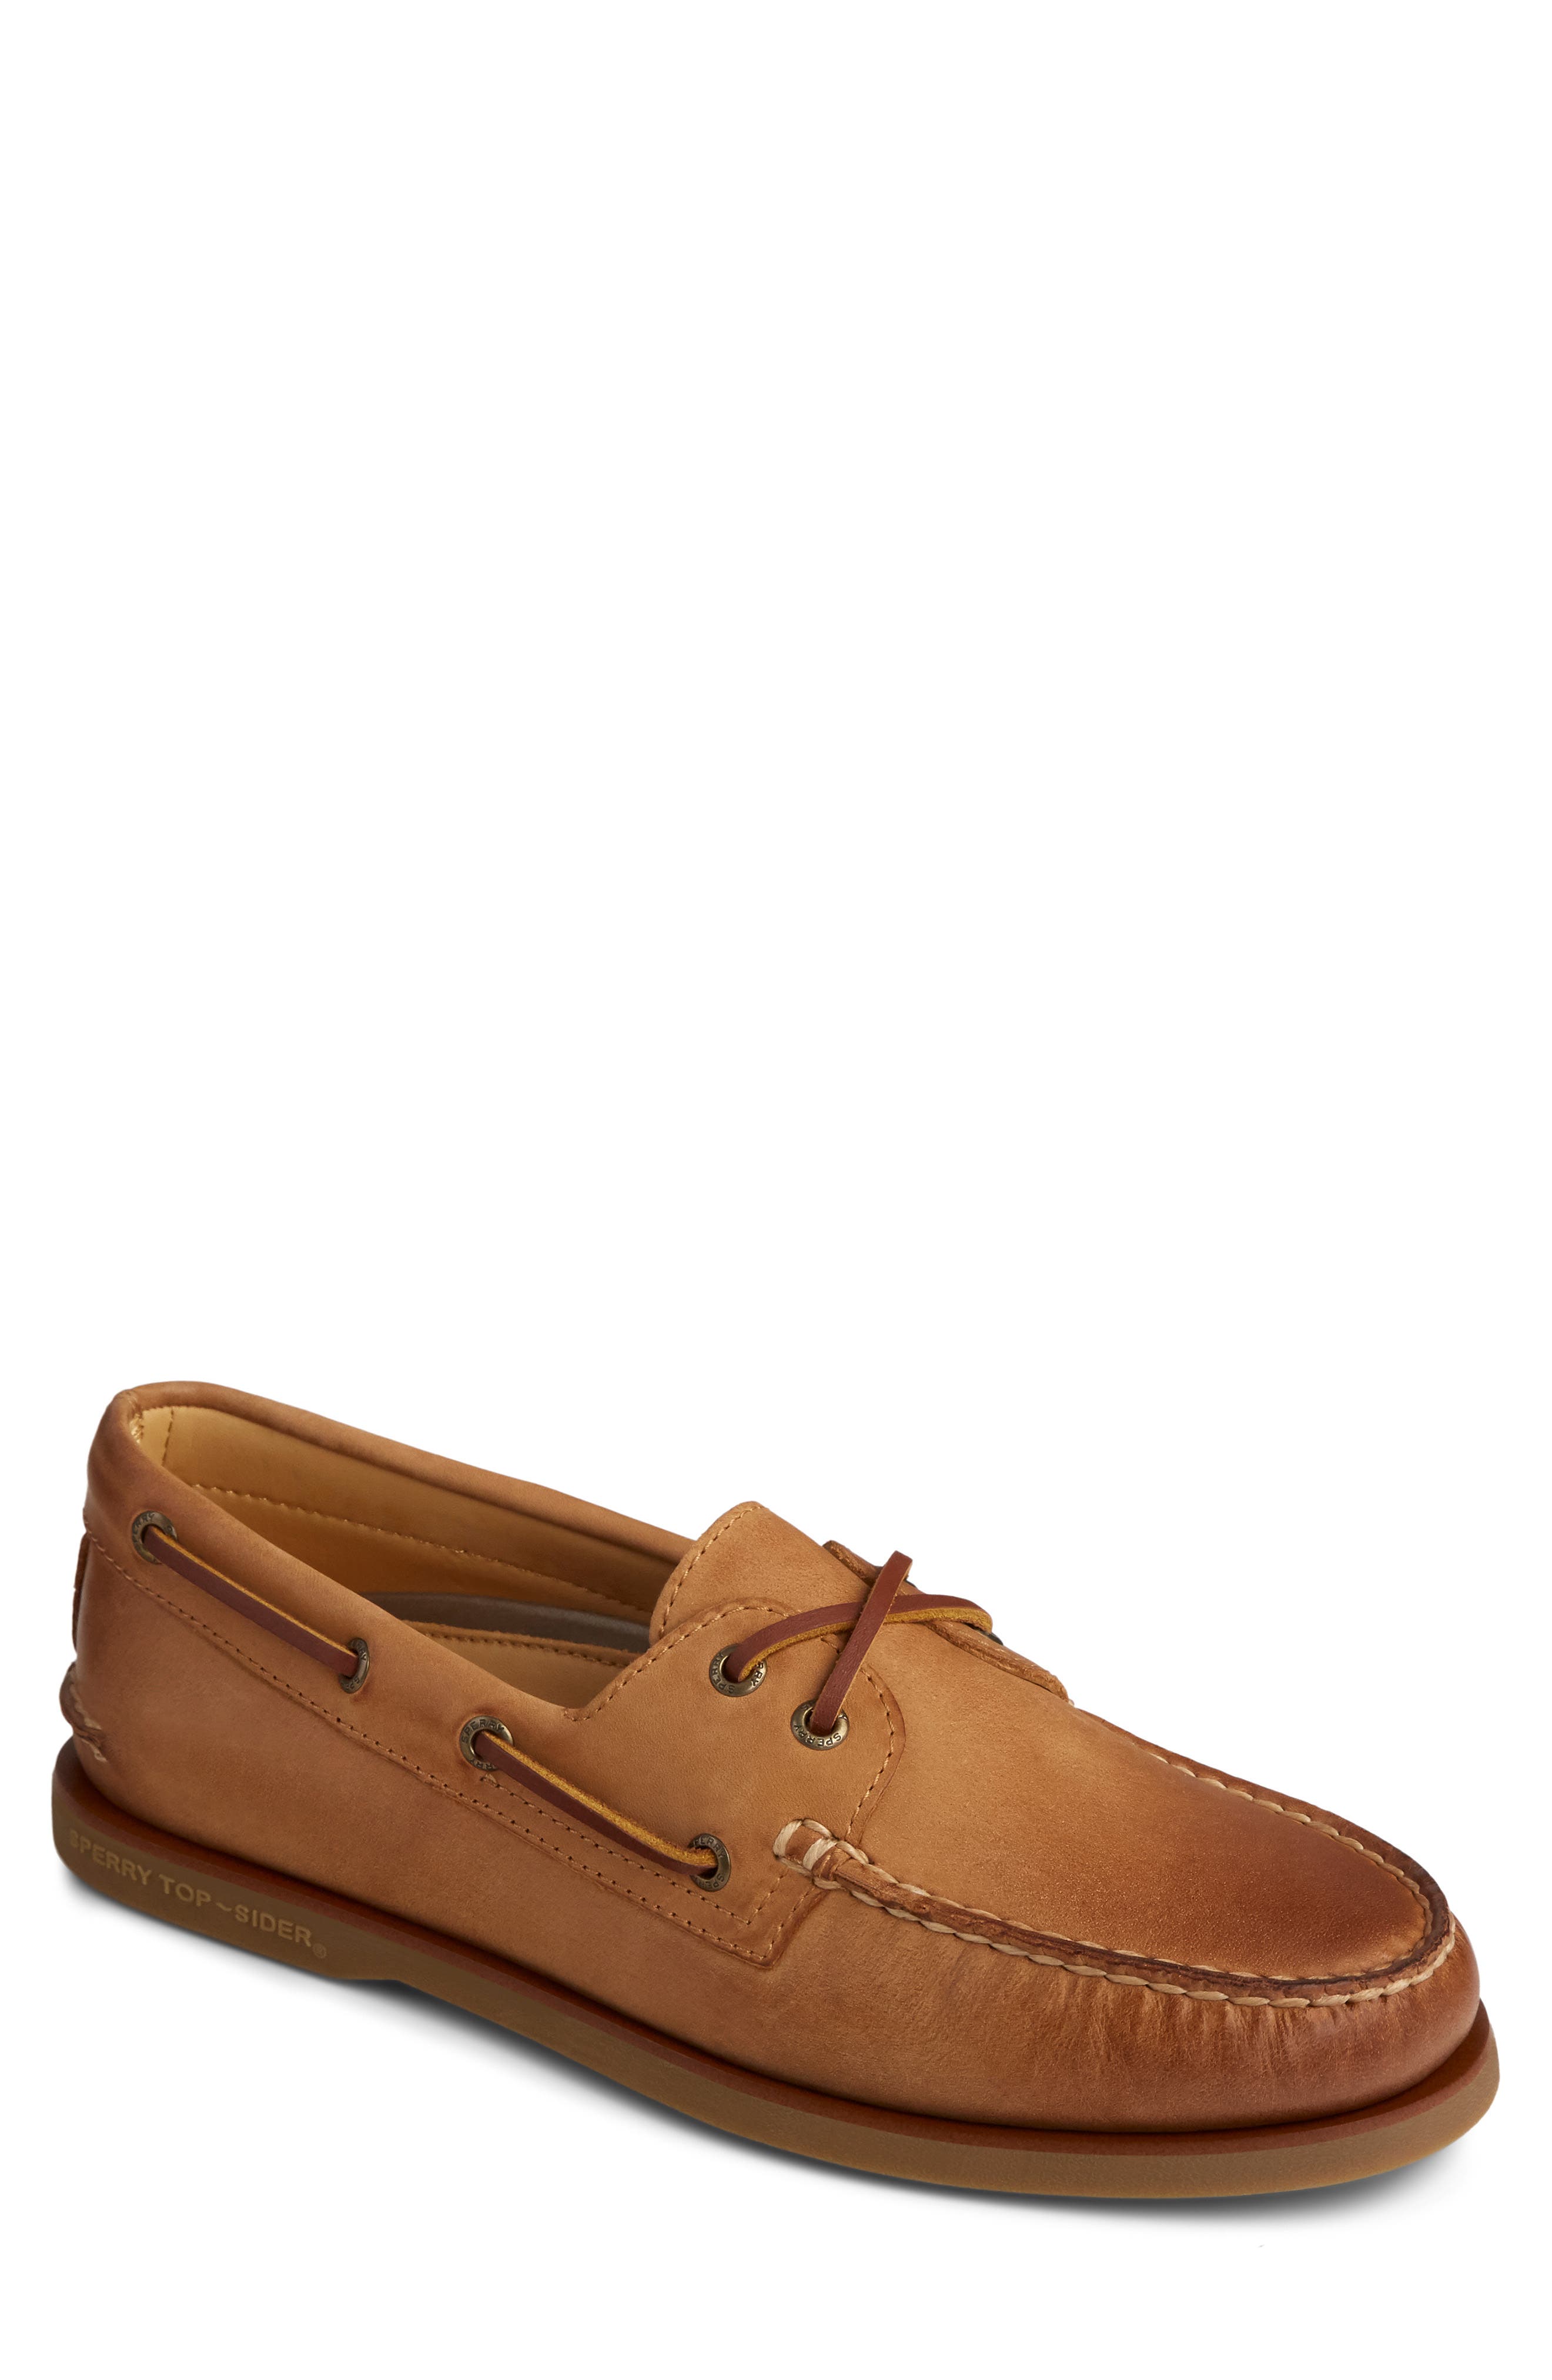 Sperry Gold Cup Authentic Original Boat Shoe | Nordstrom